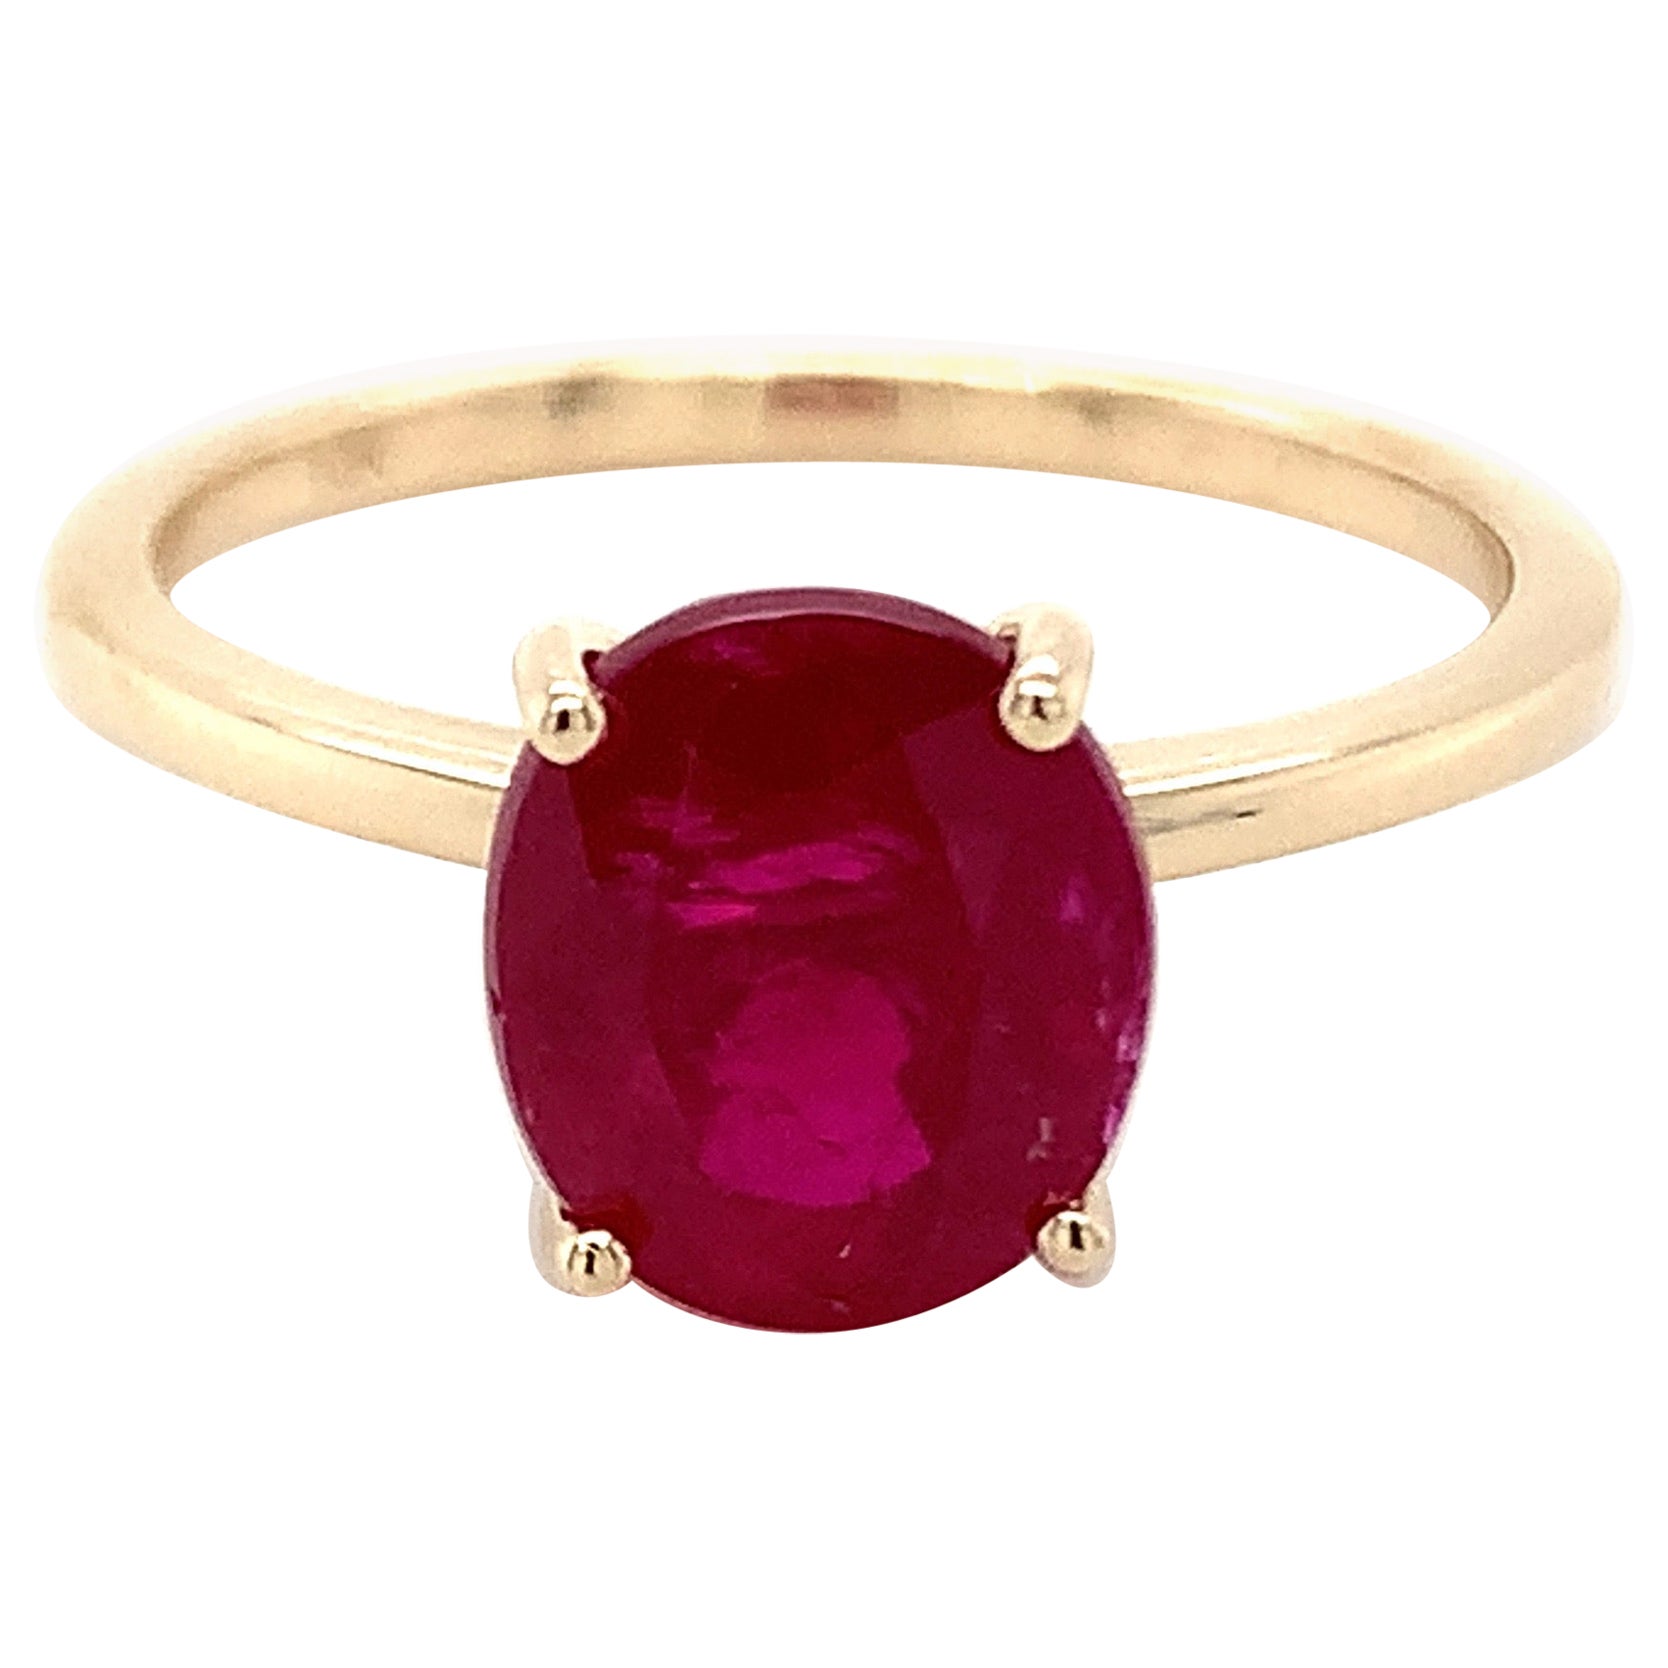 3.50 Carat Oval Shape Ruby Ring in 10k Yellow Gold